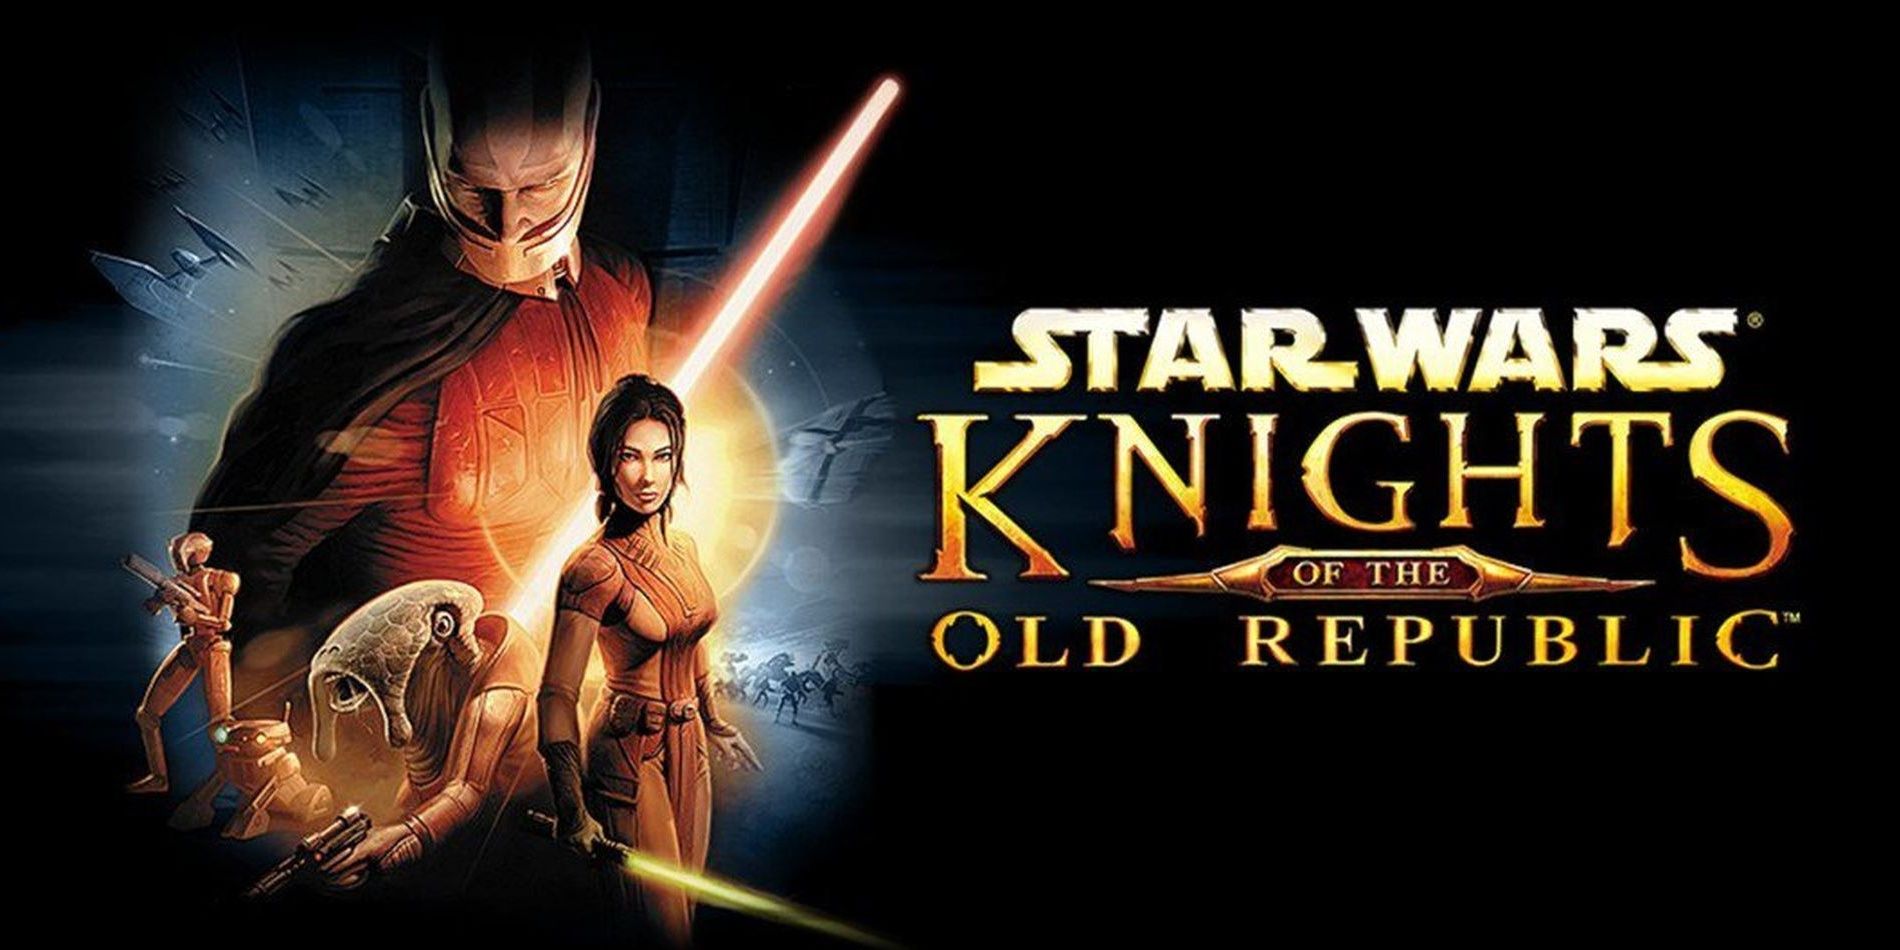 knights of the old republic gamecube